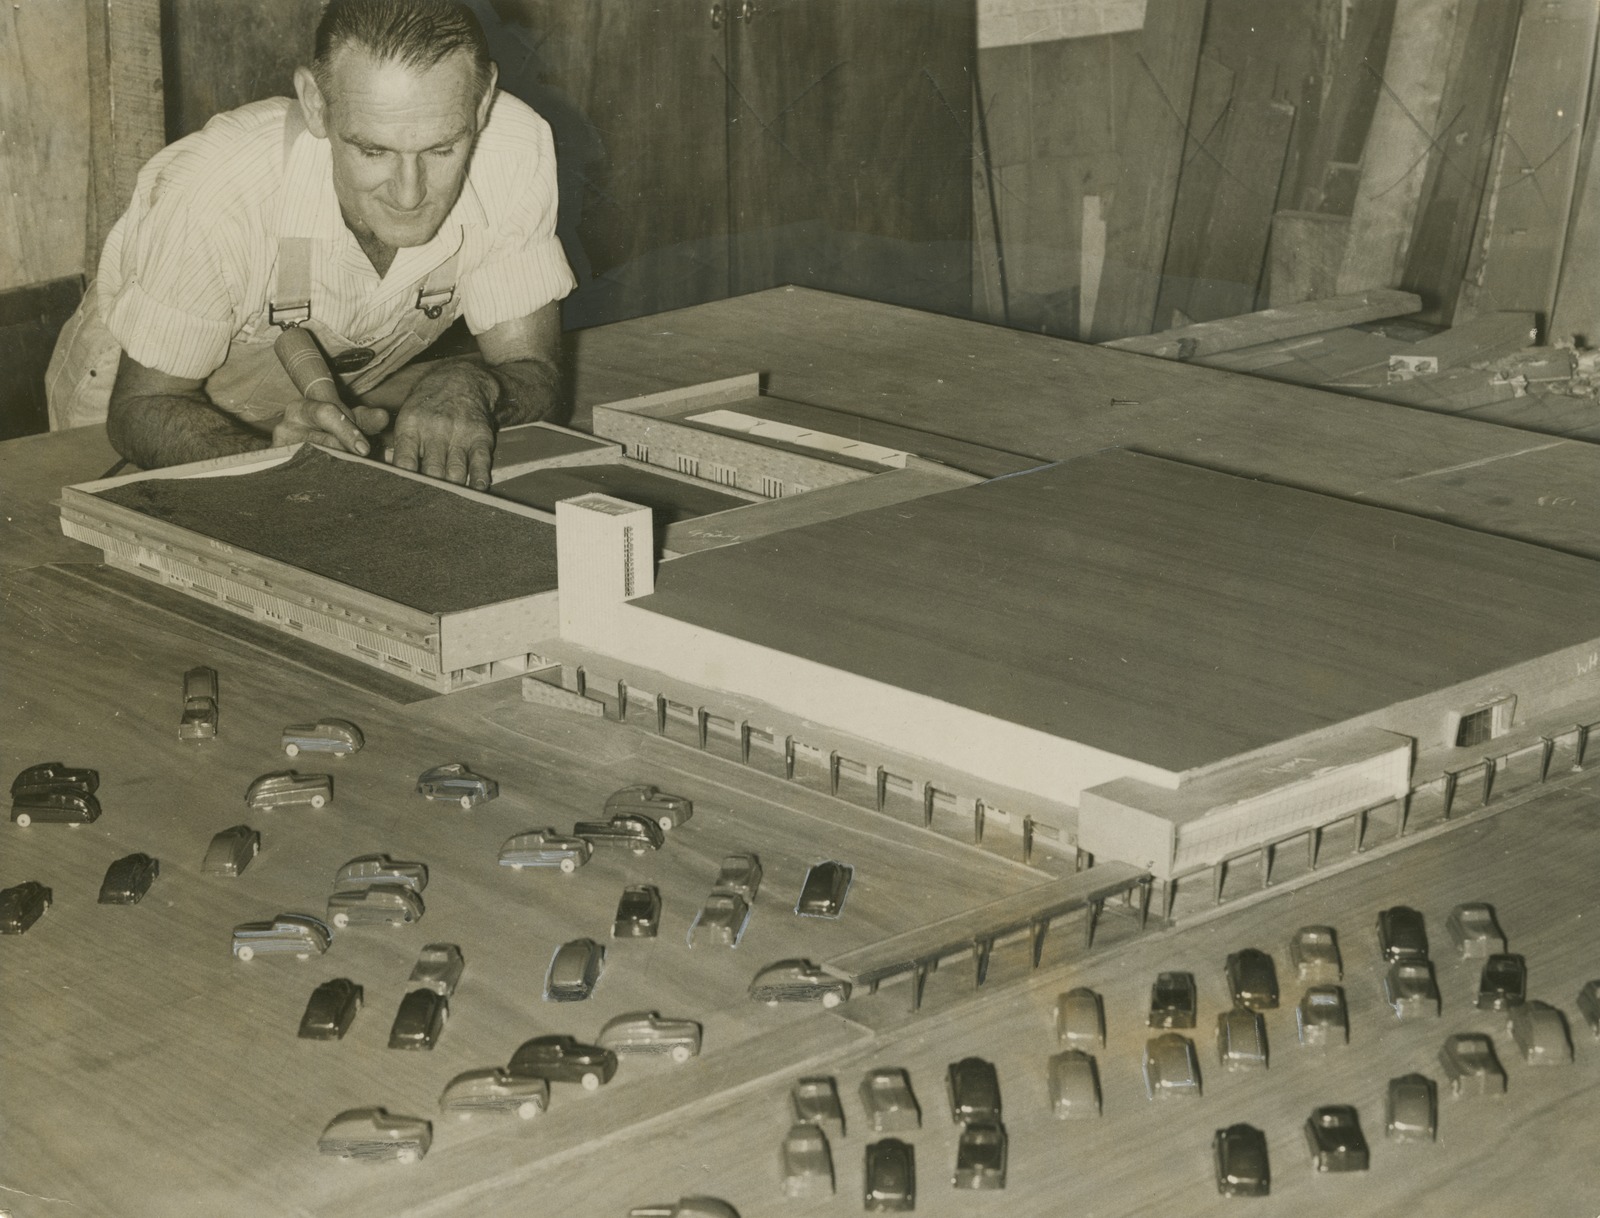 A man leans over a scale model of a department store, complete with miniture cars in the car park.